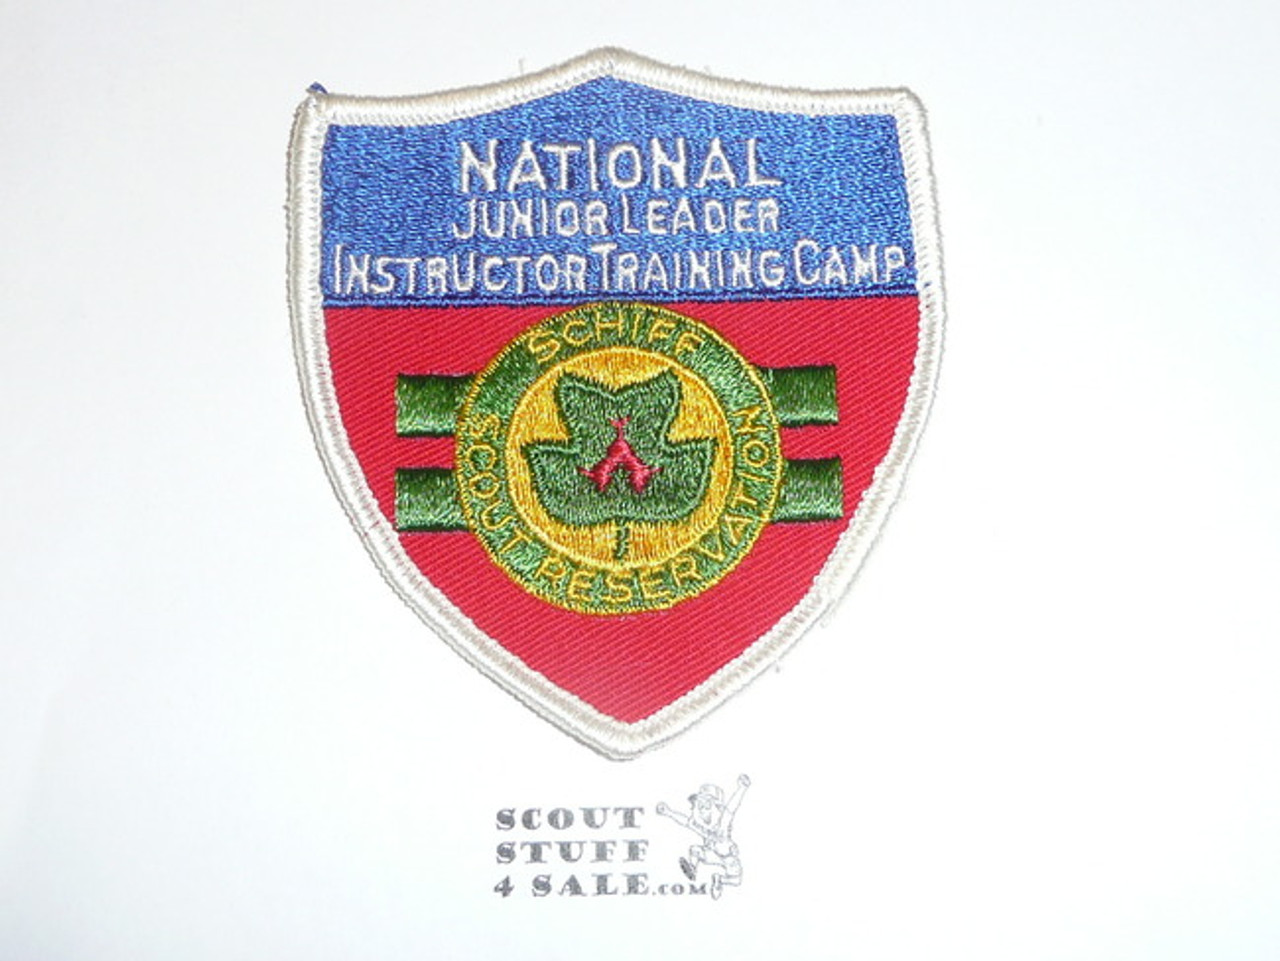 Schiff Scout Reservation, National Junior Leader Instructor Training Camp Shield Patch, Three Lines of Text